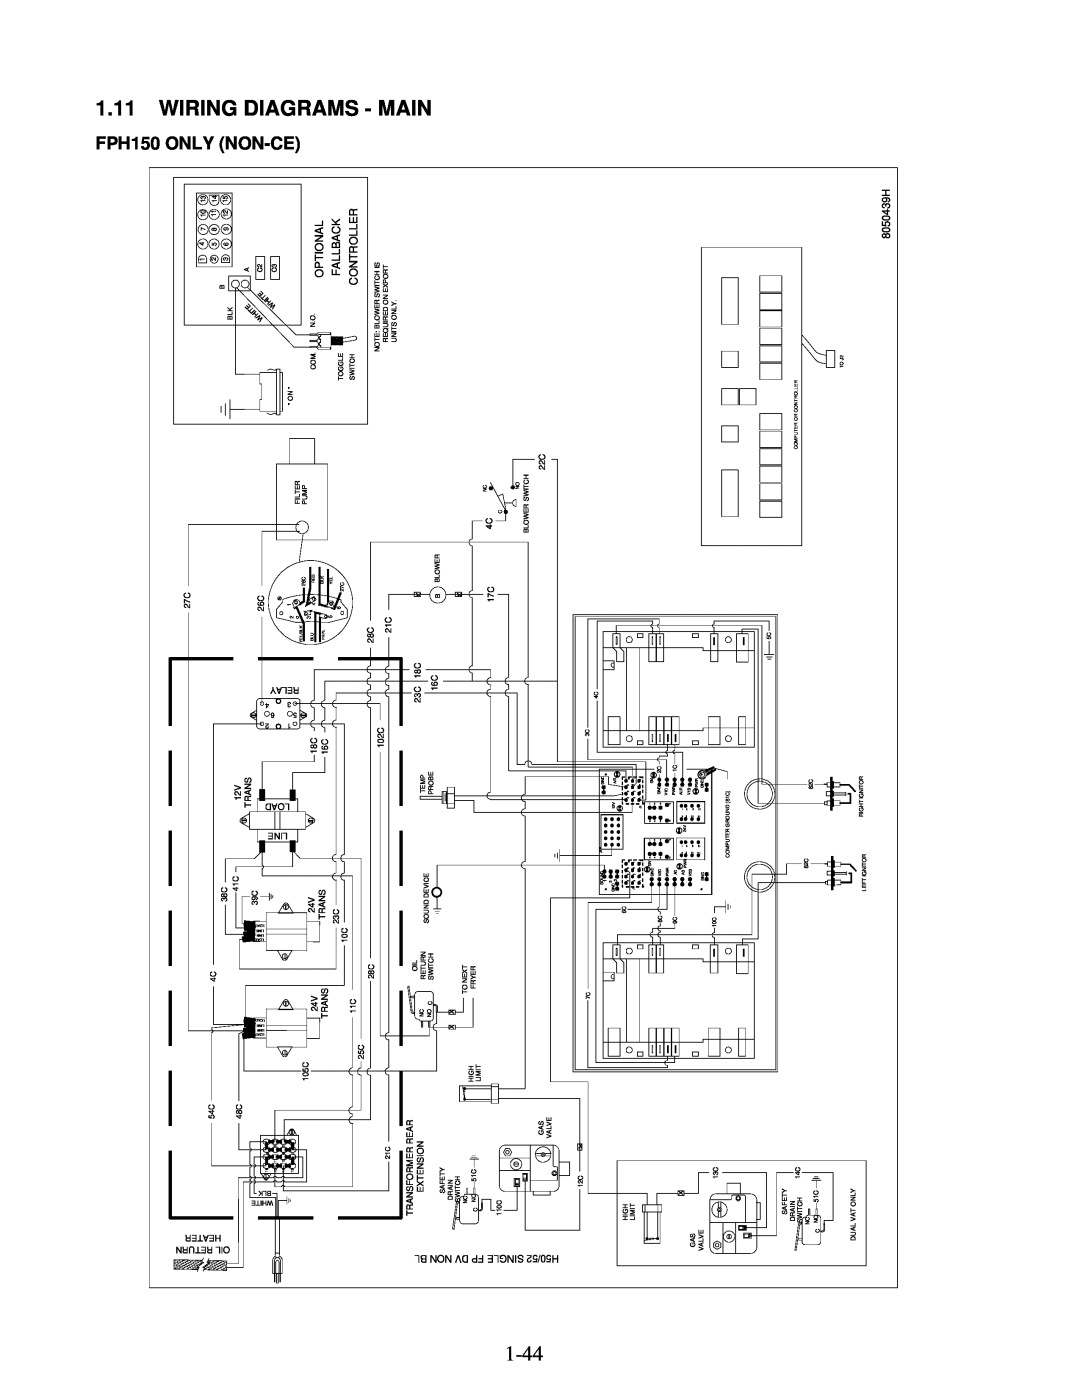 Frymaster H50 Series manual 1.11WIRING DIAGRAMS - MAIN, FPH150 ONLY NON-CE 